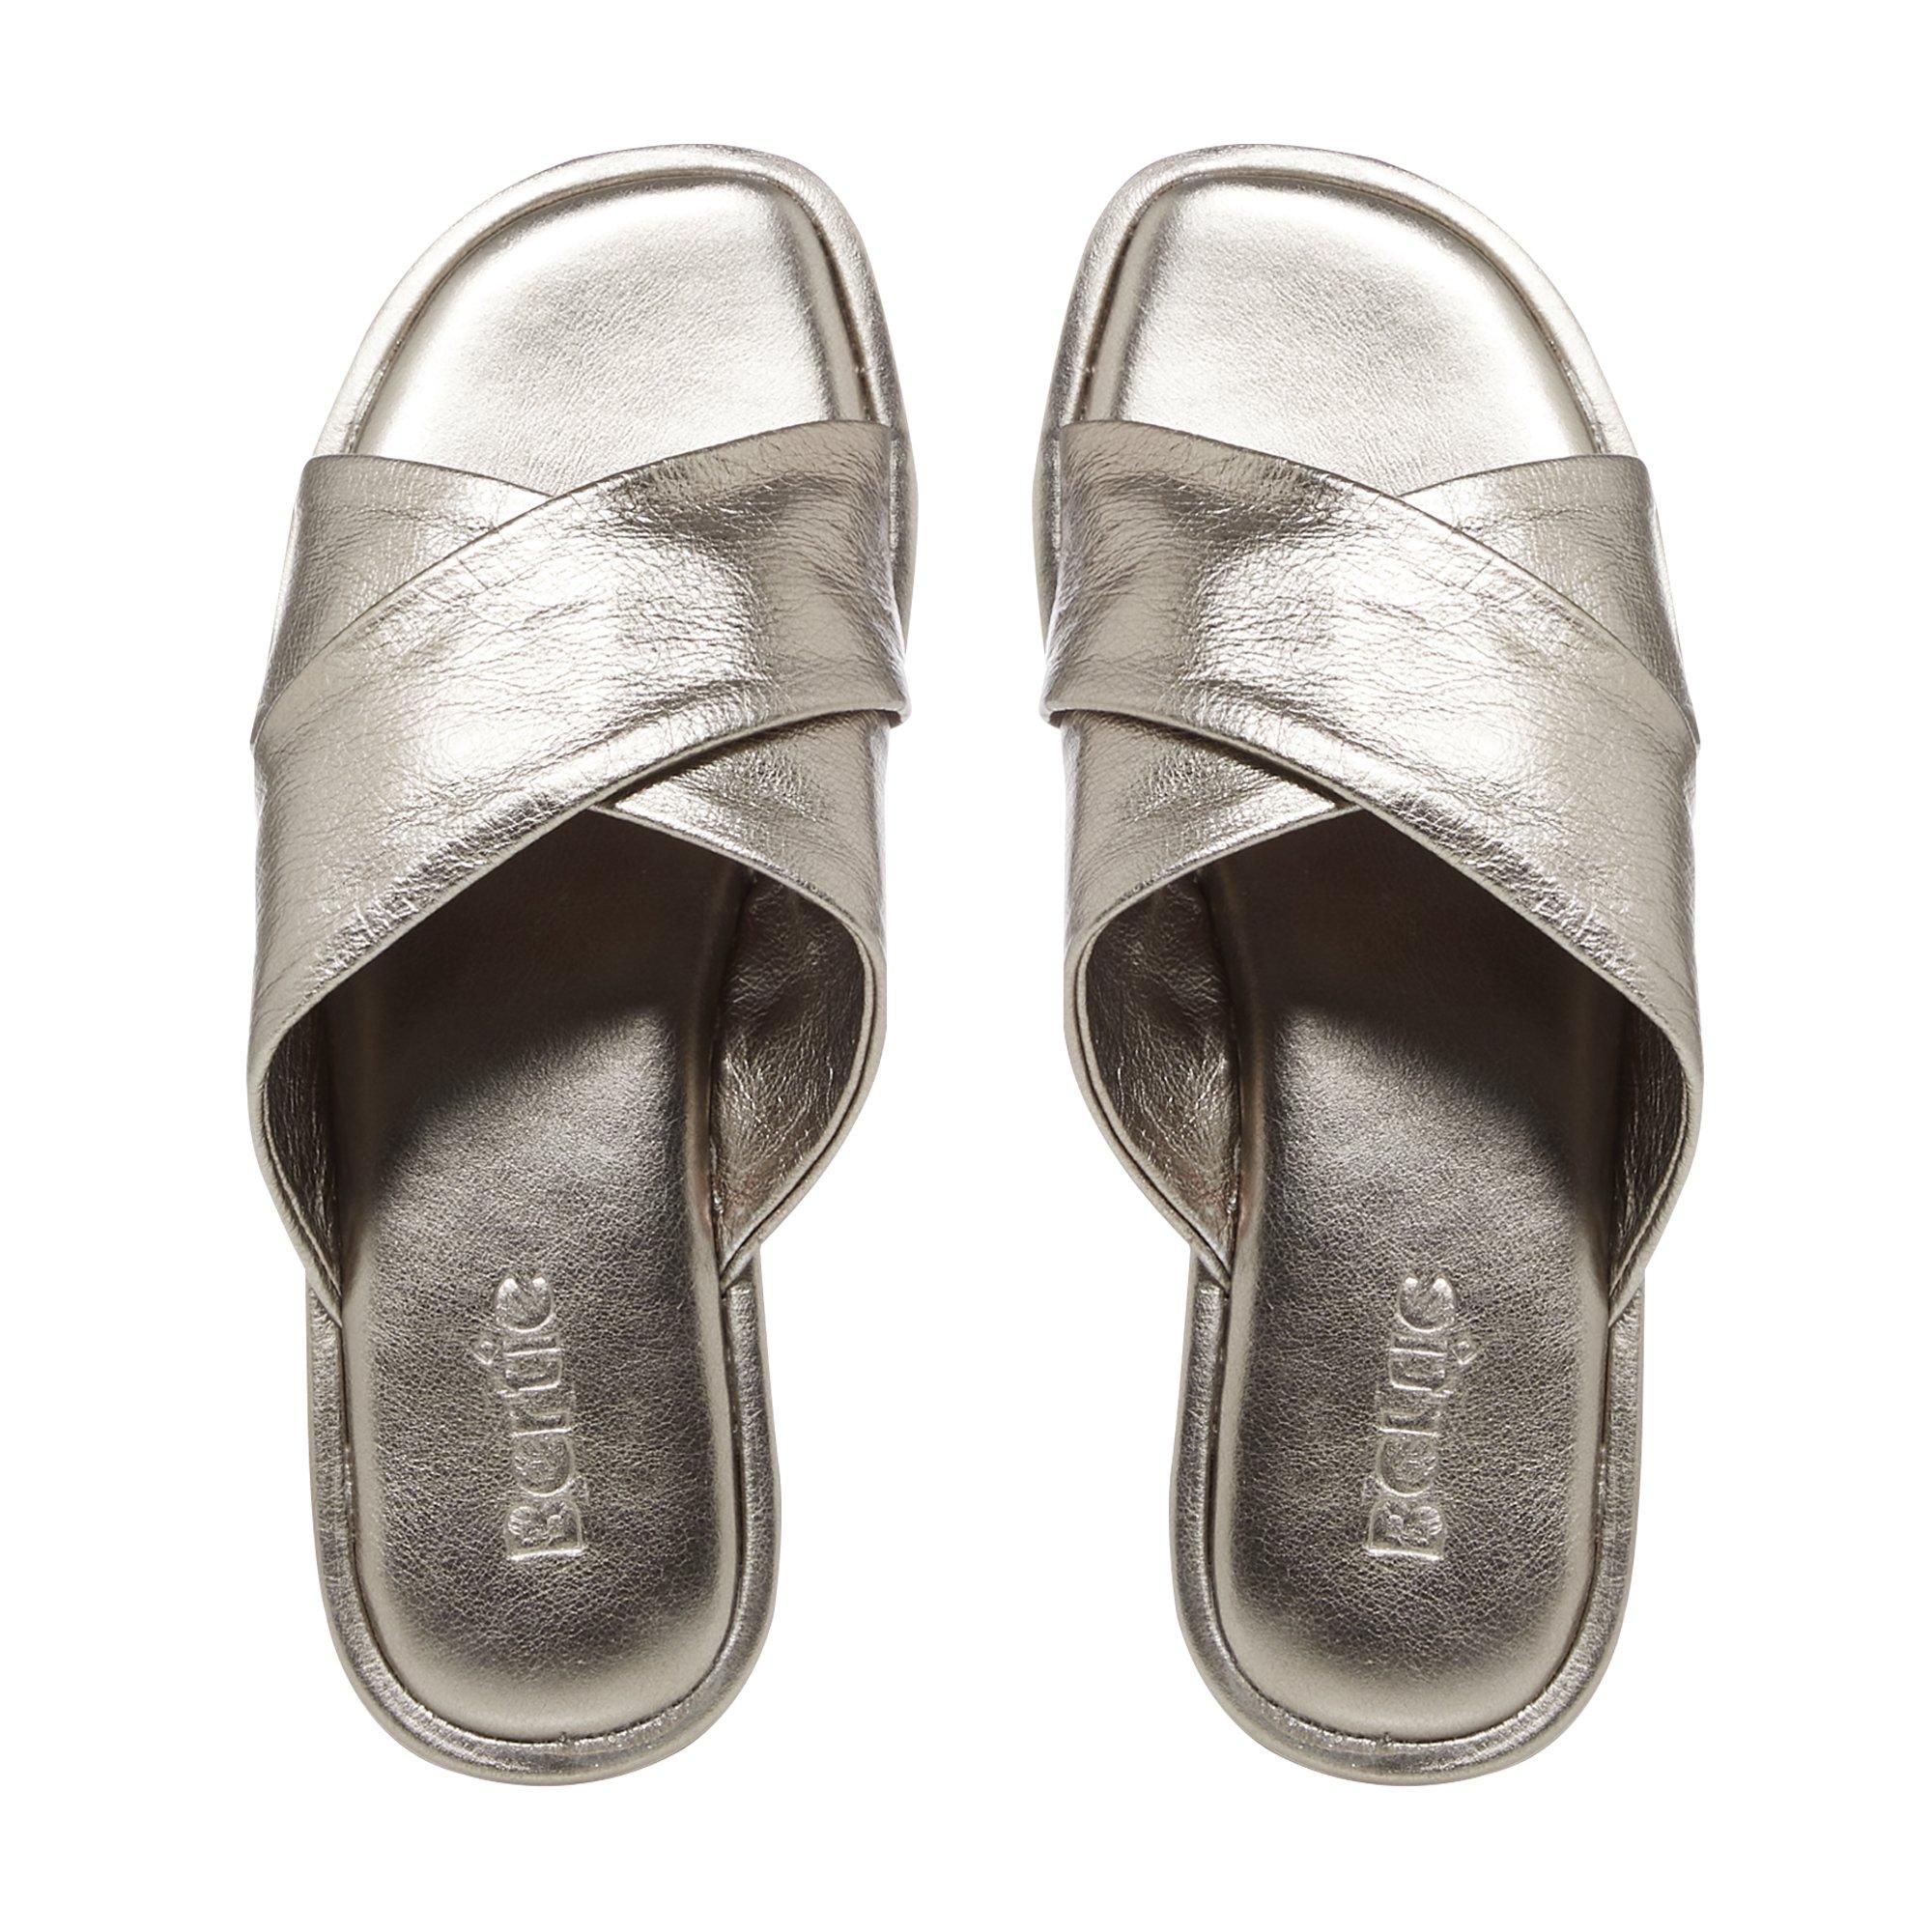 The Lennex sandal from Bertie is a stylish summertime essential. The classic slip on design features crossover straps. Resting on a flat sole for all-day comfort.